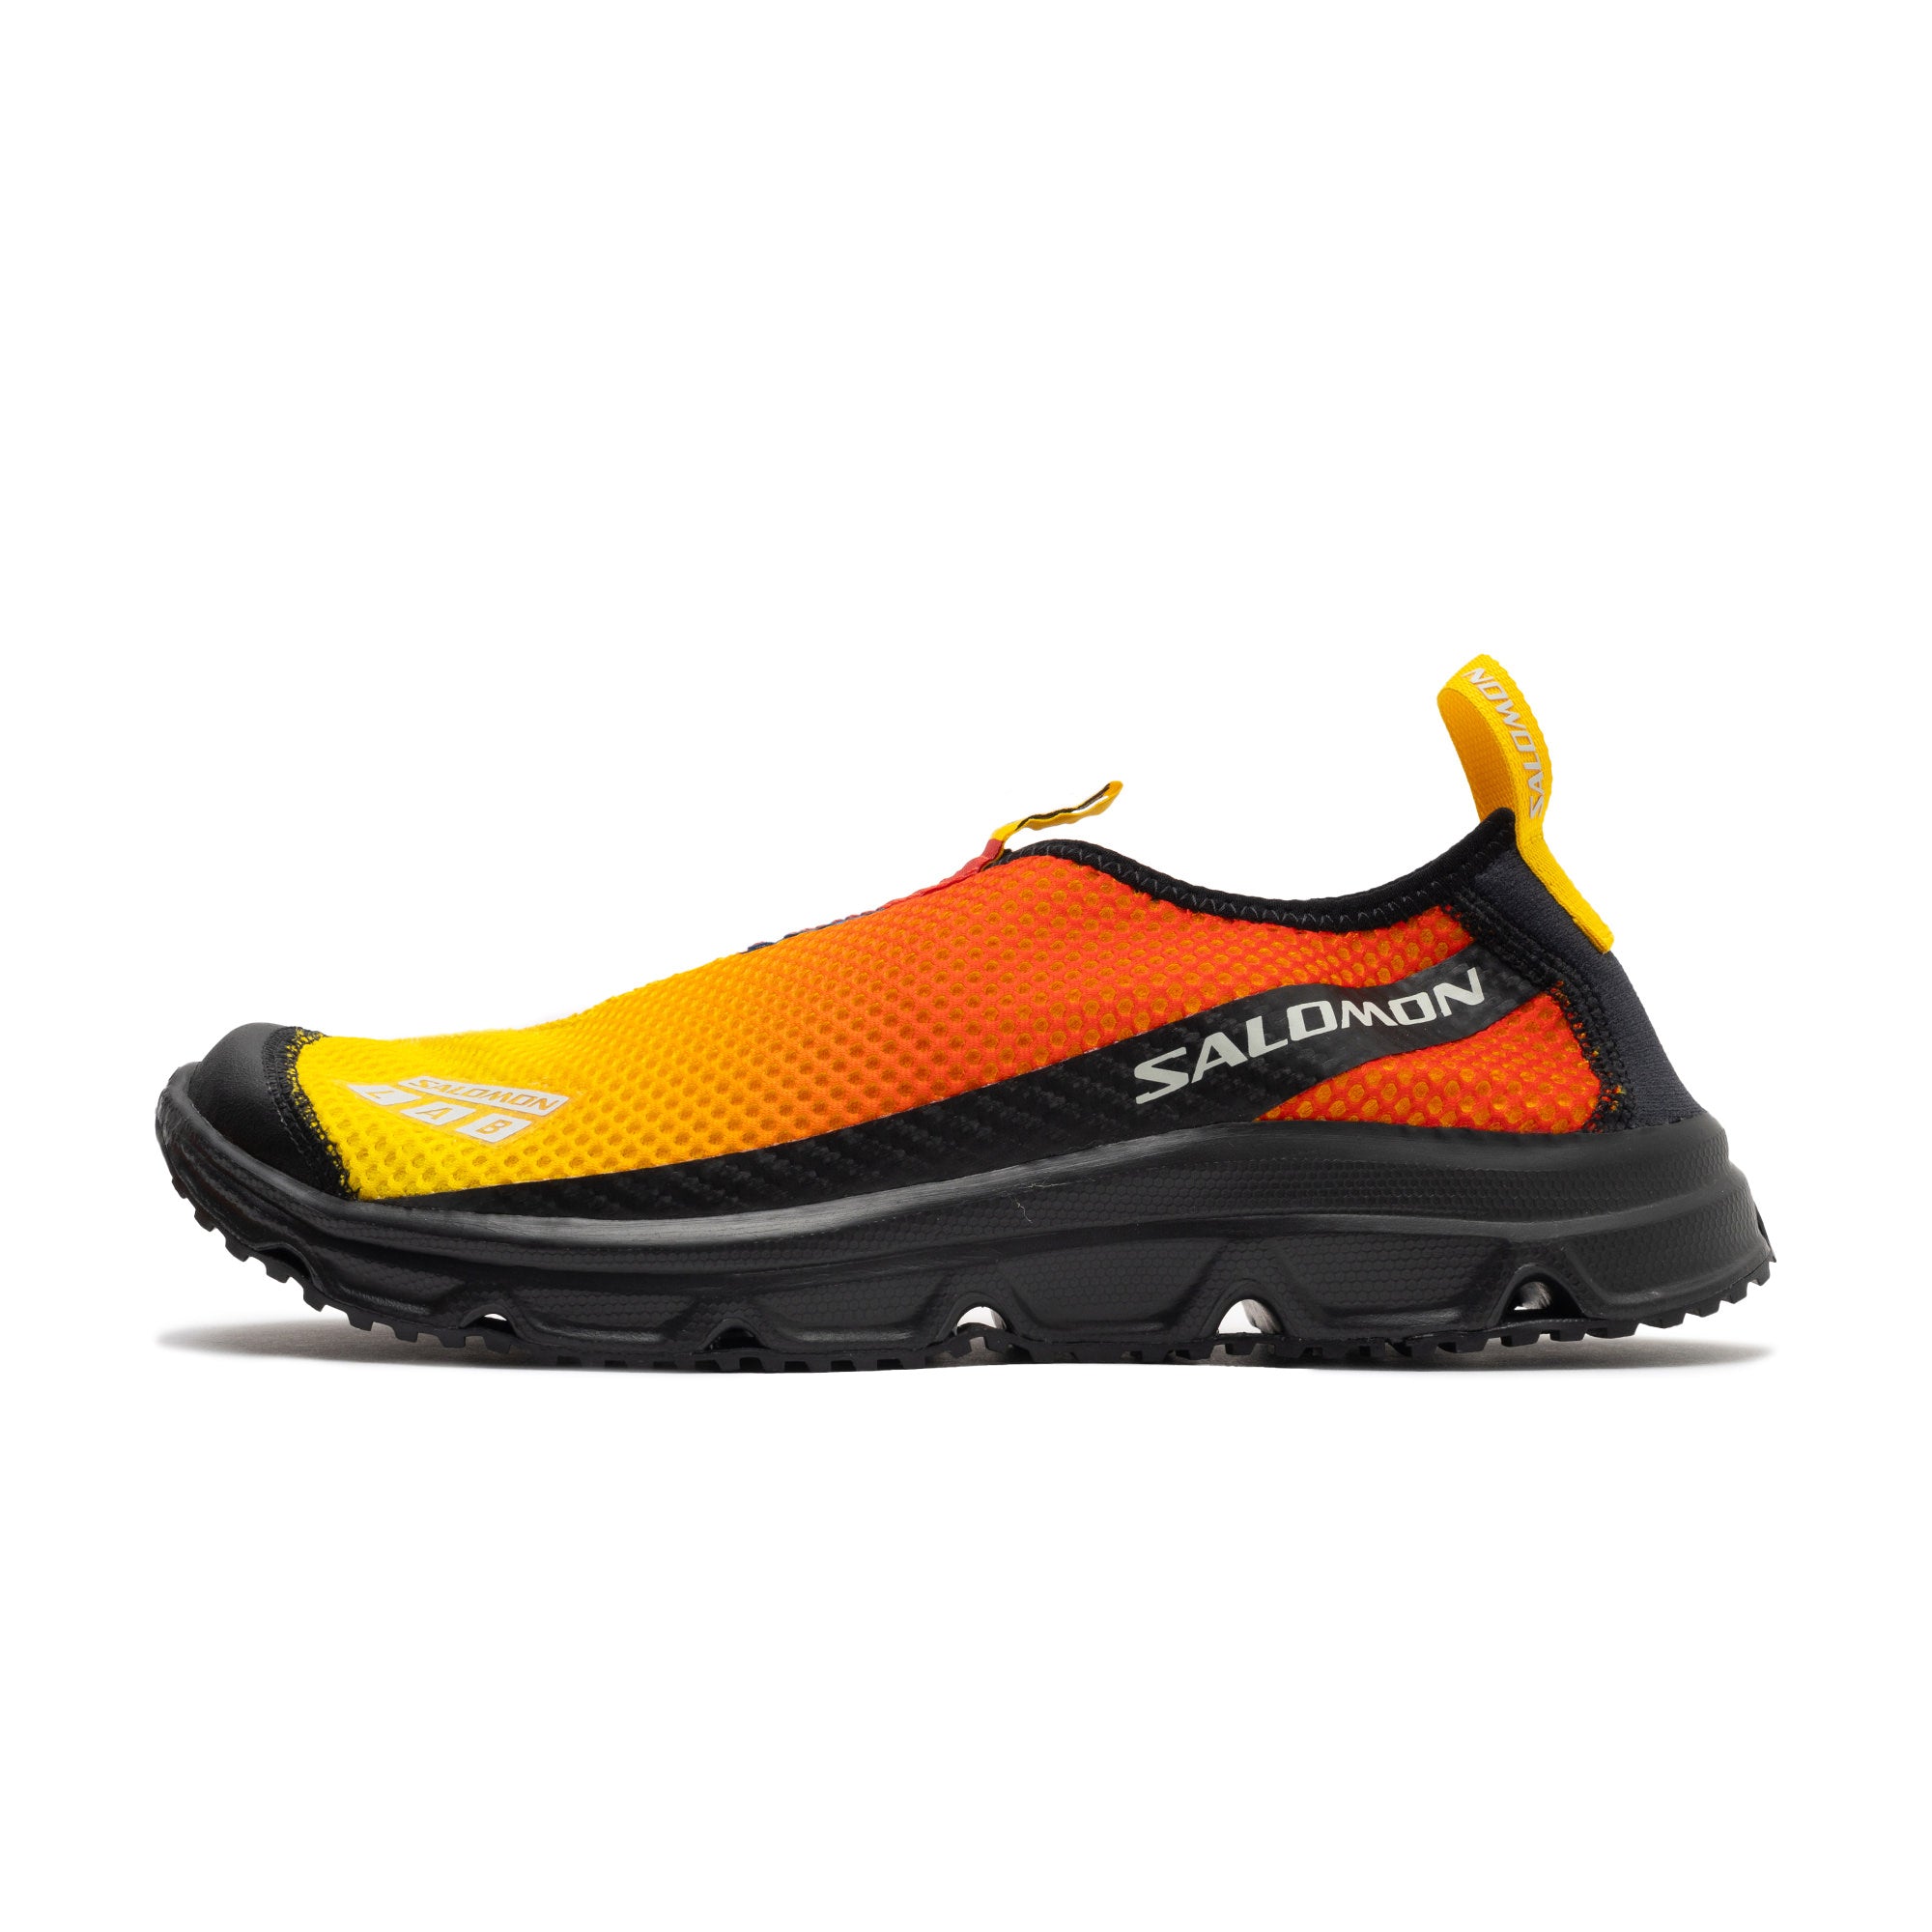 The Salomon Odyssey Mid GTX is a waterproof and lightweight backpacking shoe highly recommended for